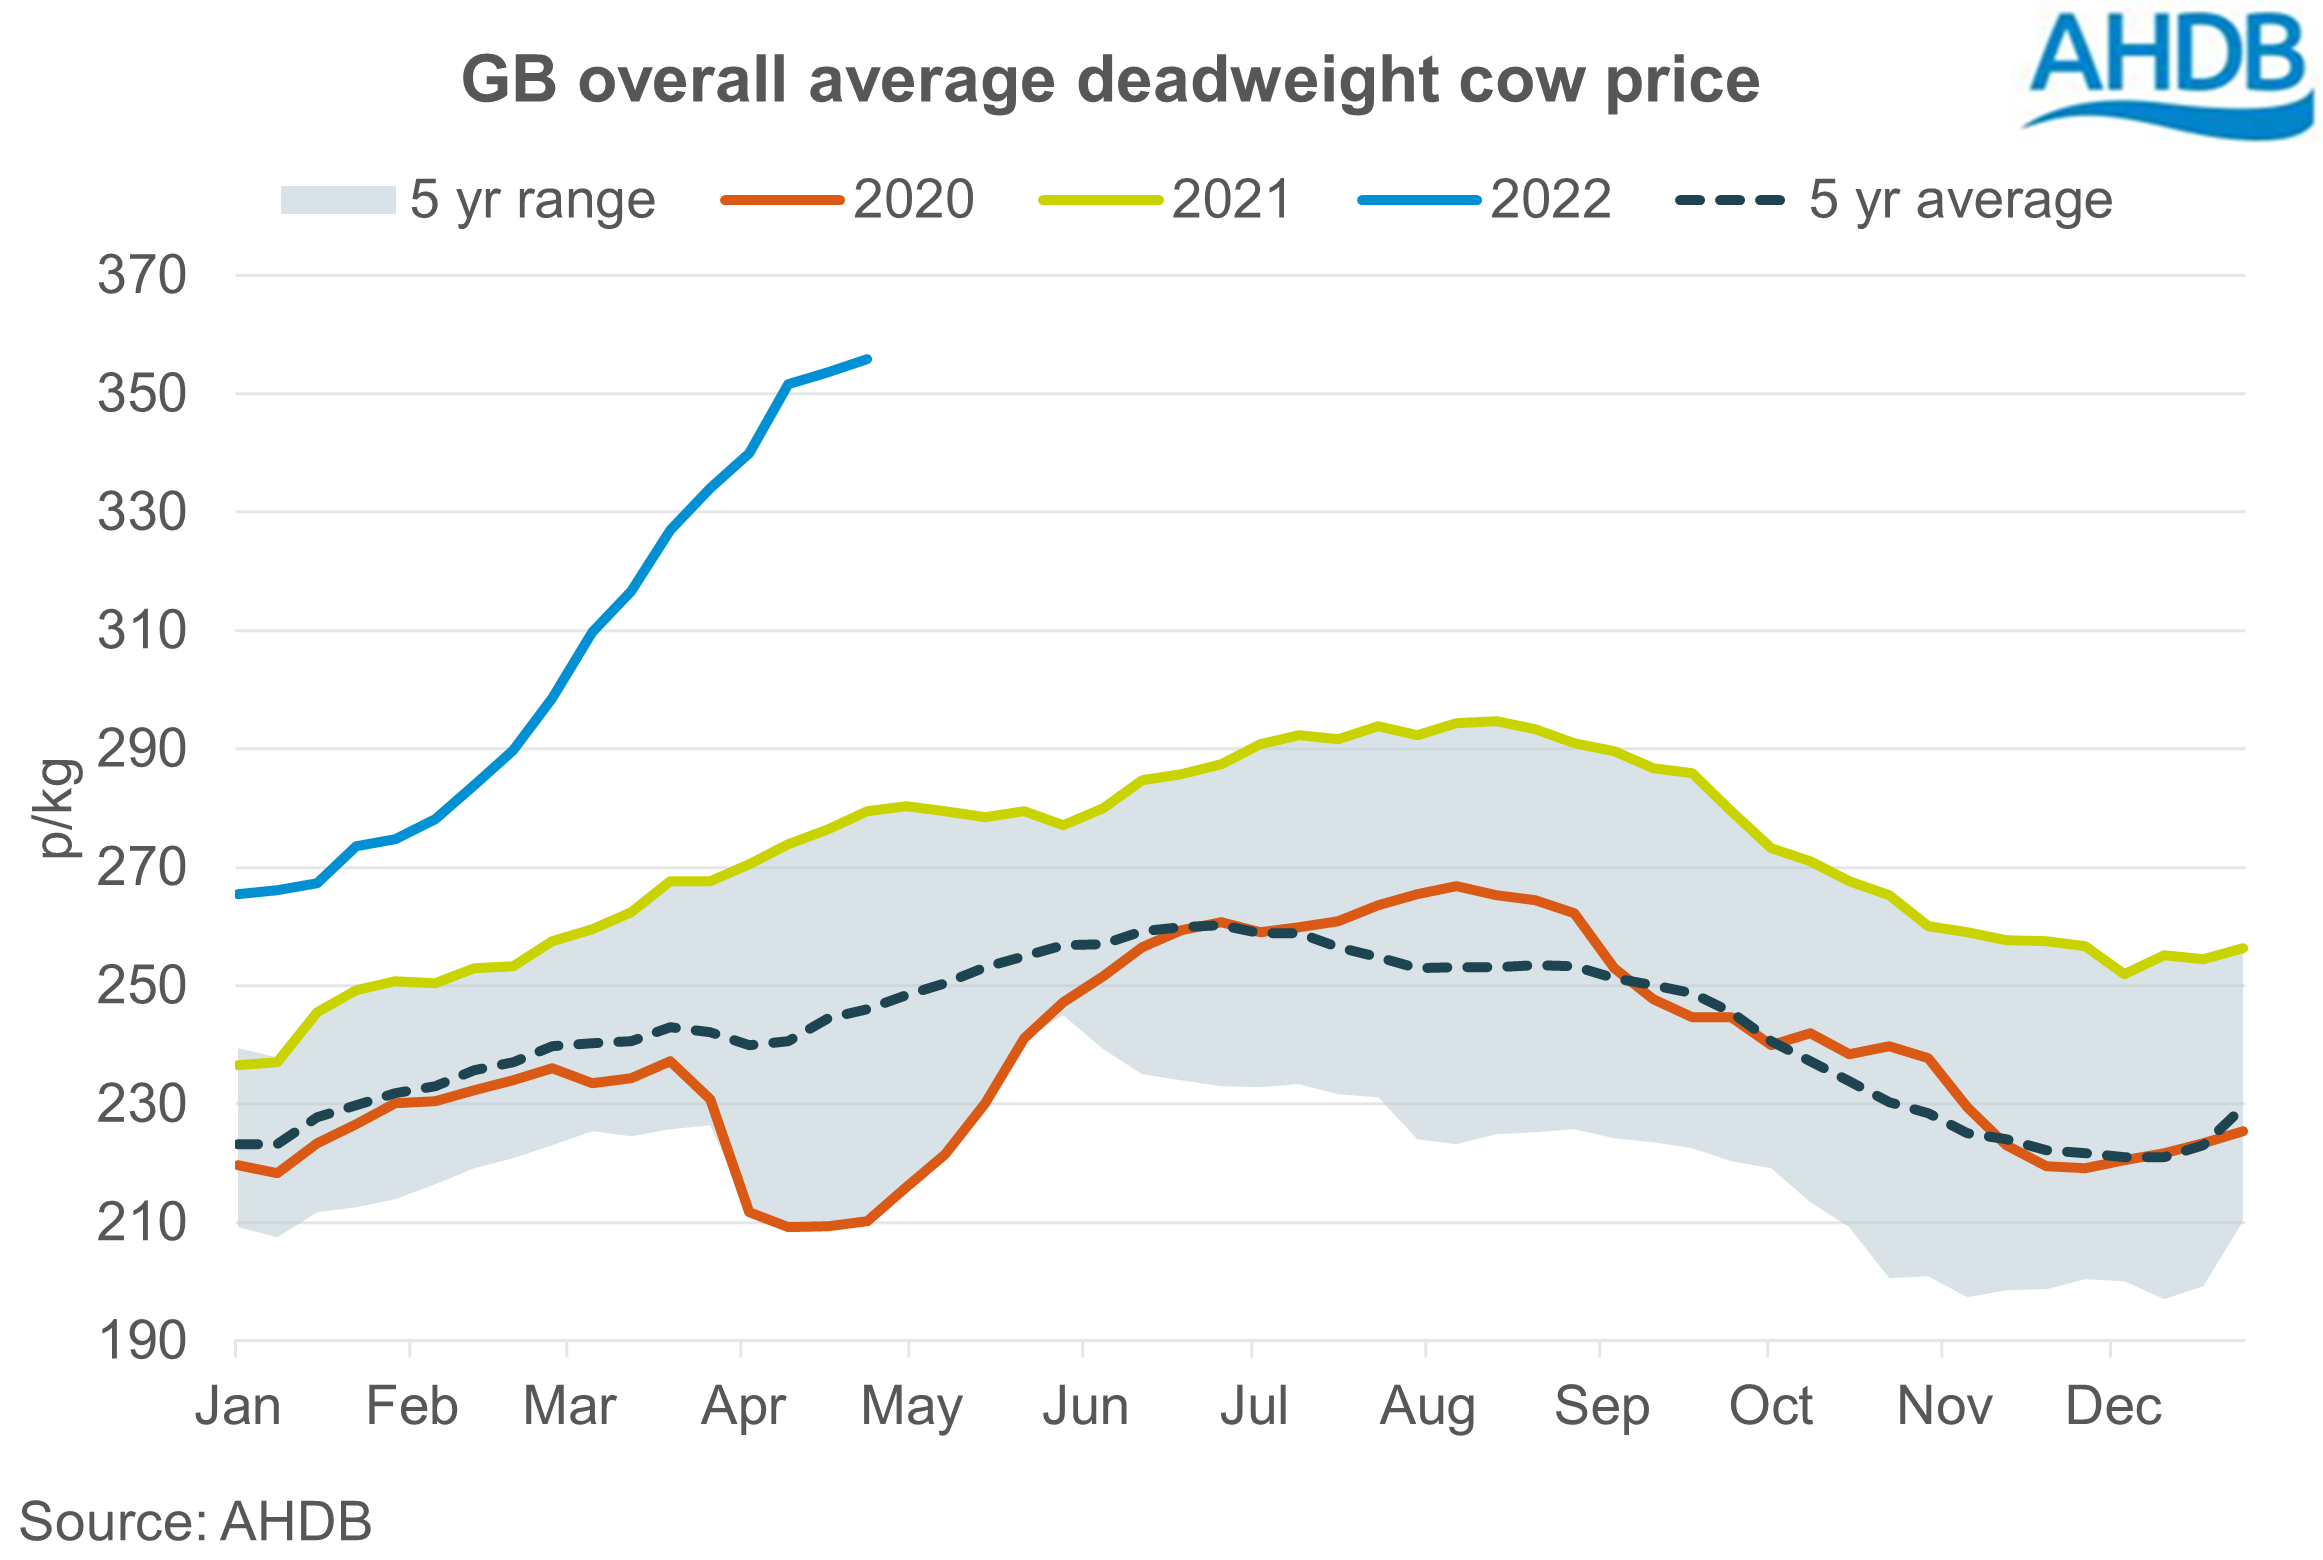 Graph showing weekly GB average deadweight cow price, w/e 27 Apr 2022